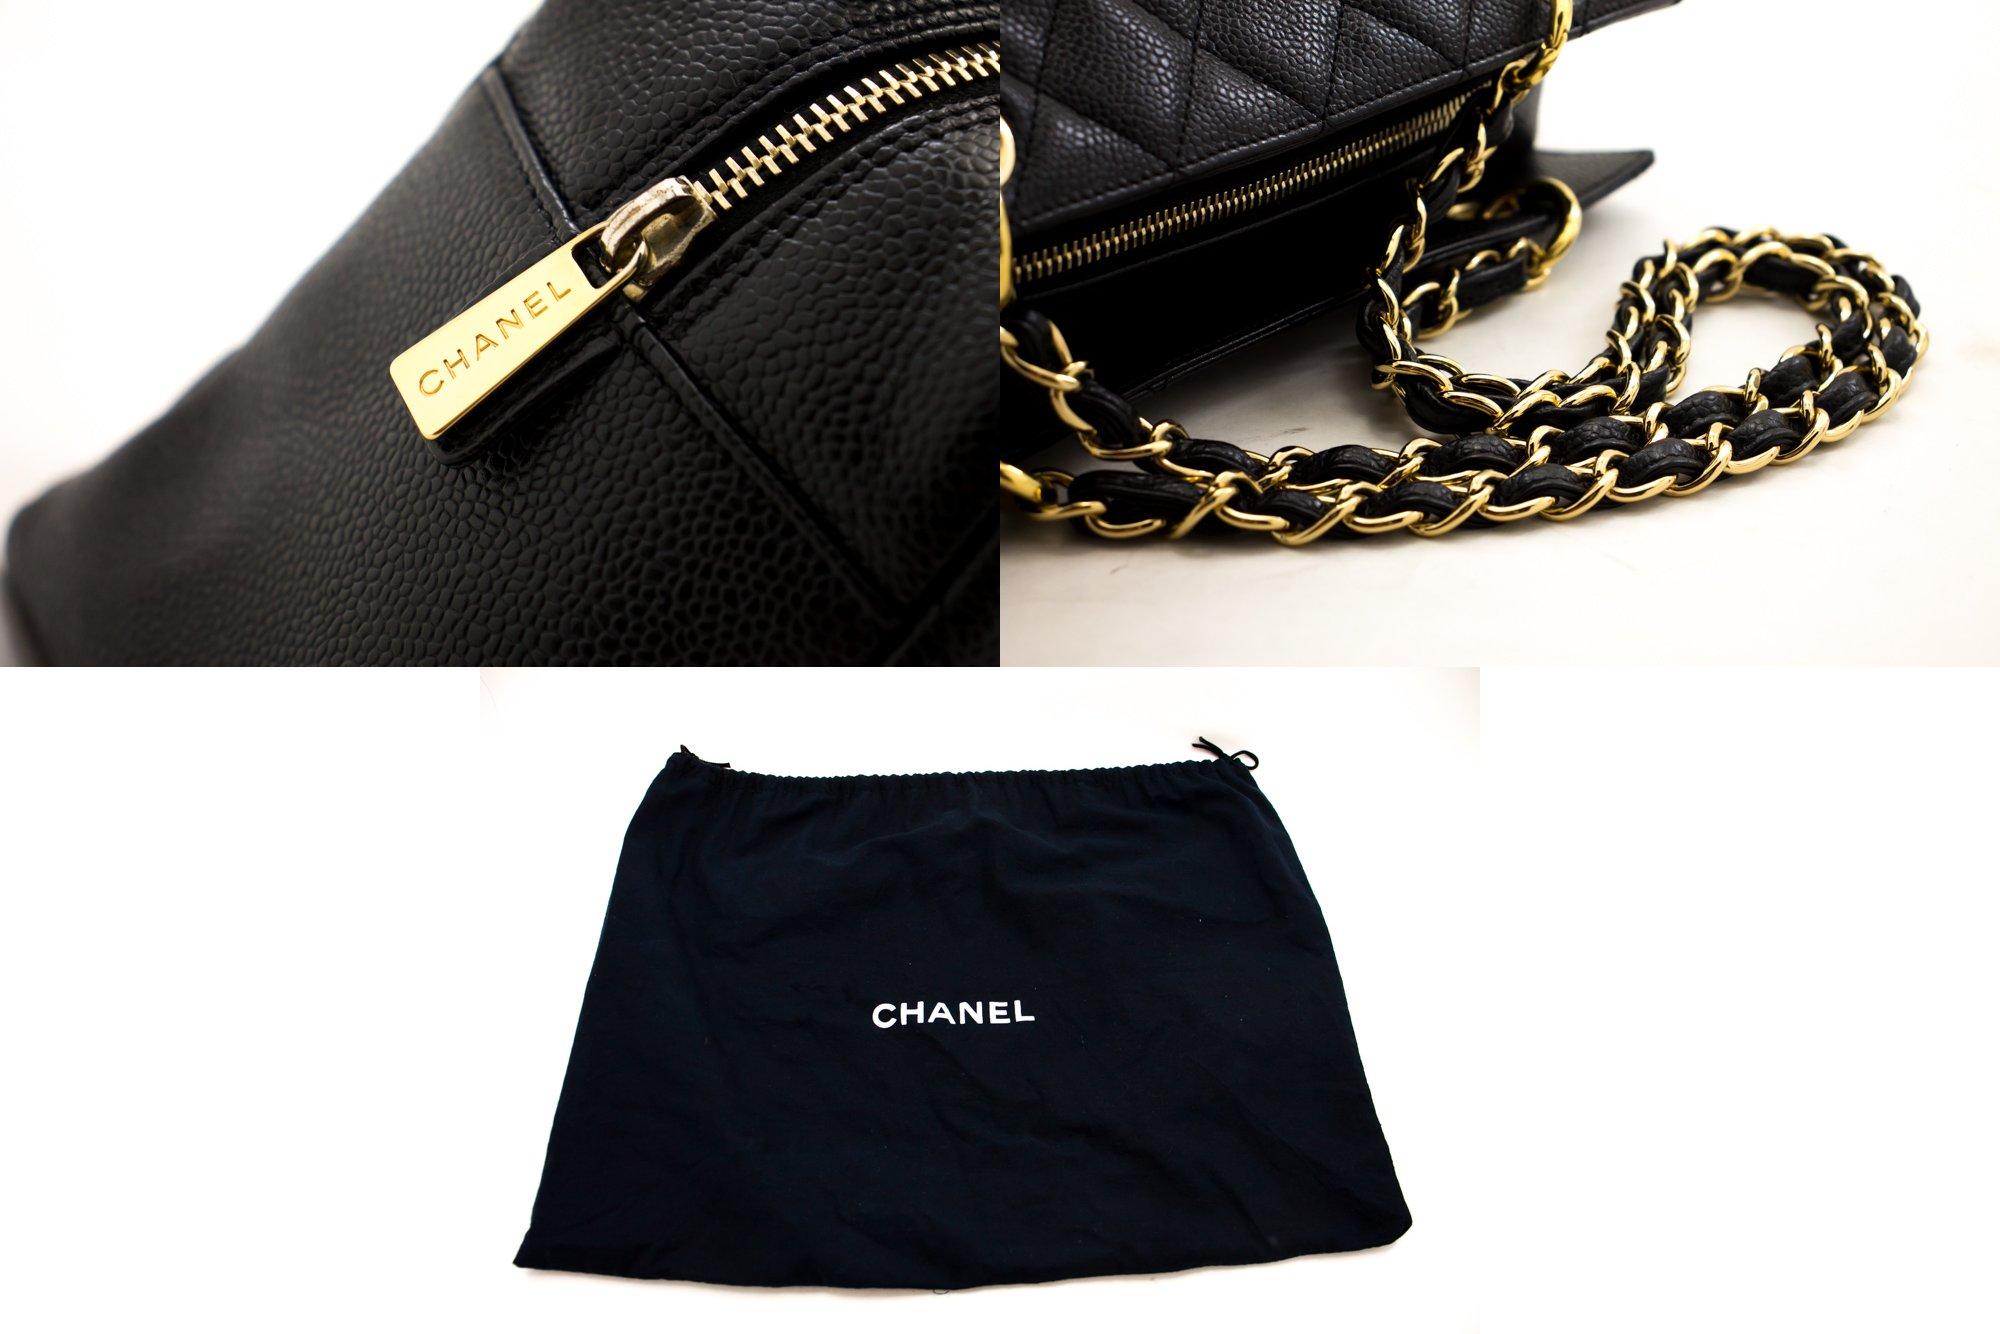 CHANEL Caviar Chain Shoulder Shopping Tote Bag Black Quilted Purse 3